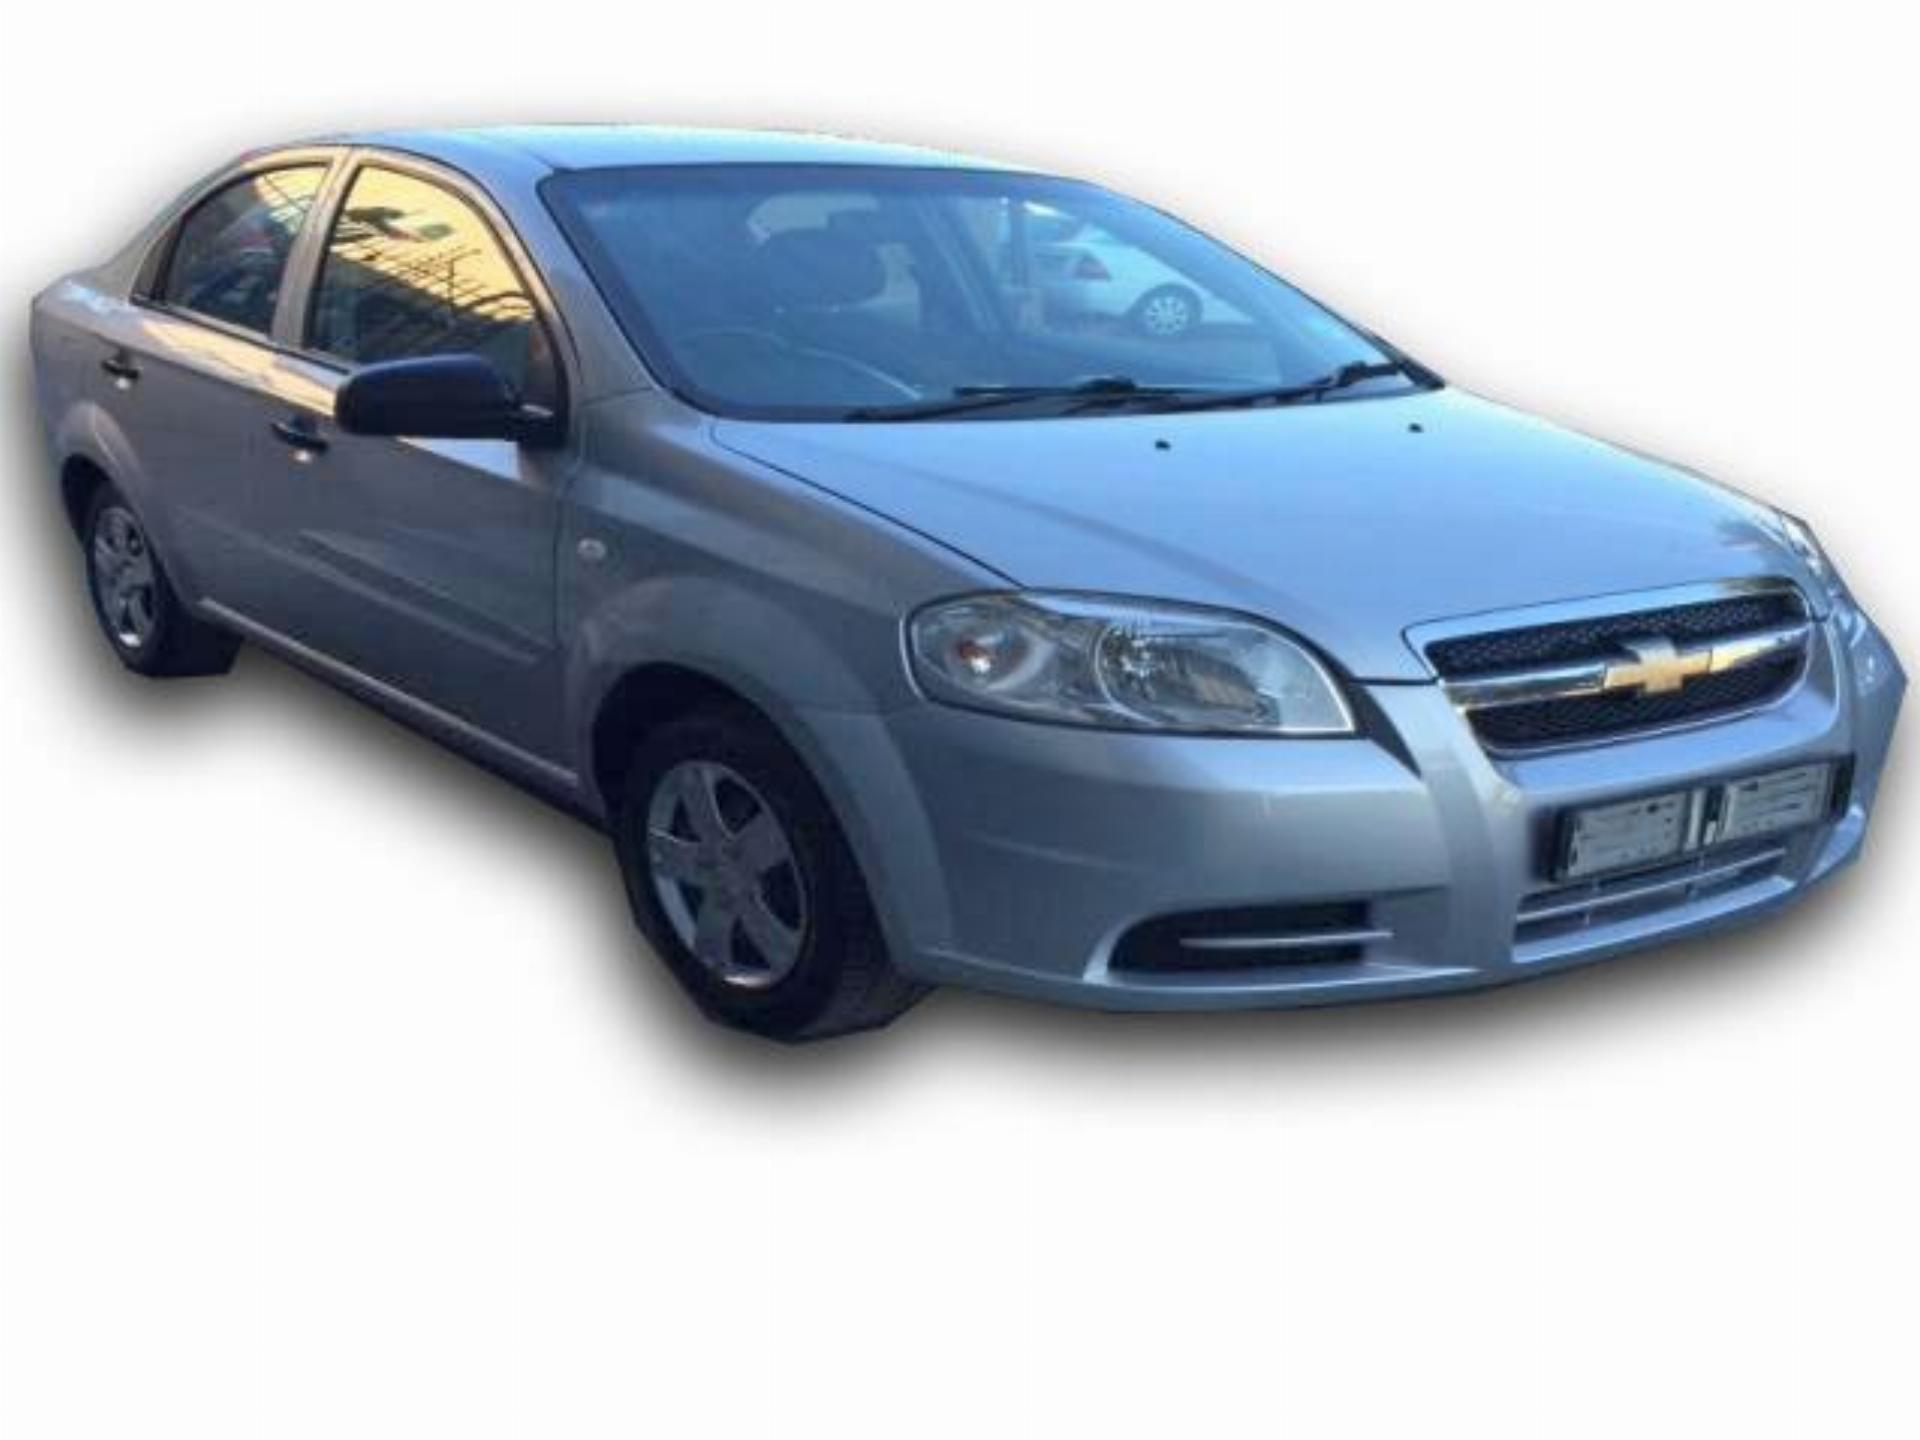 Used Chevrolet Aveo 1.6L 2010 on auction PV1012313